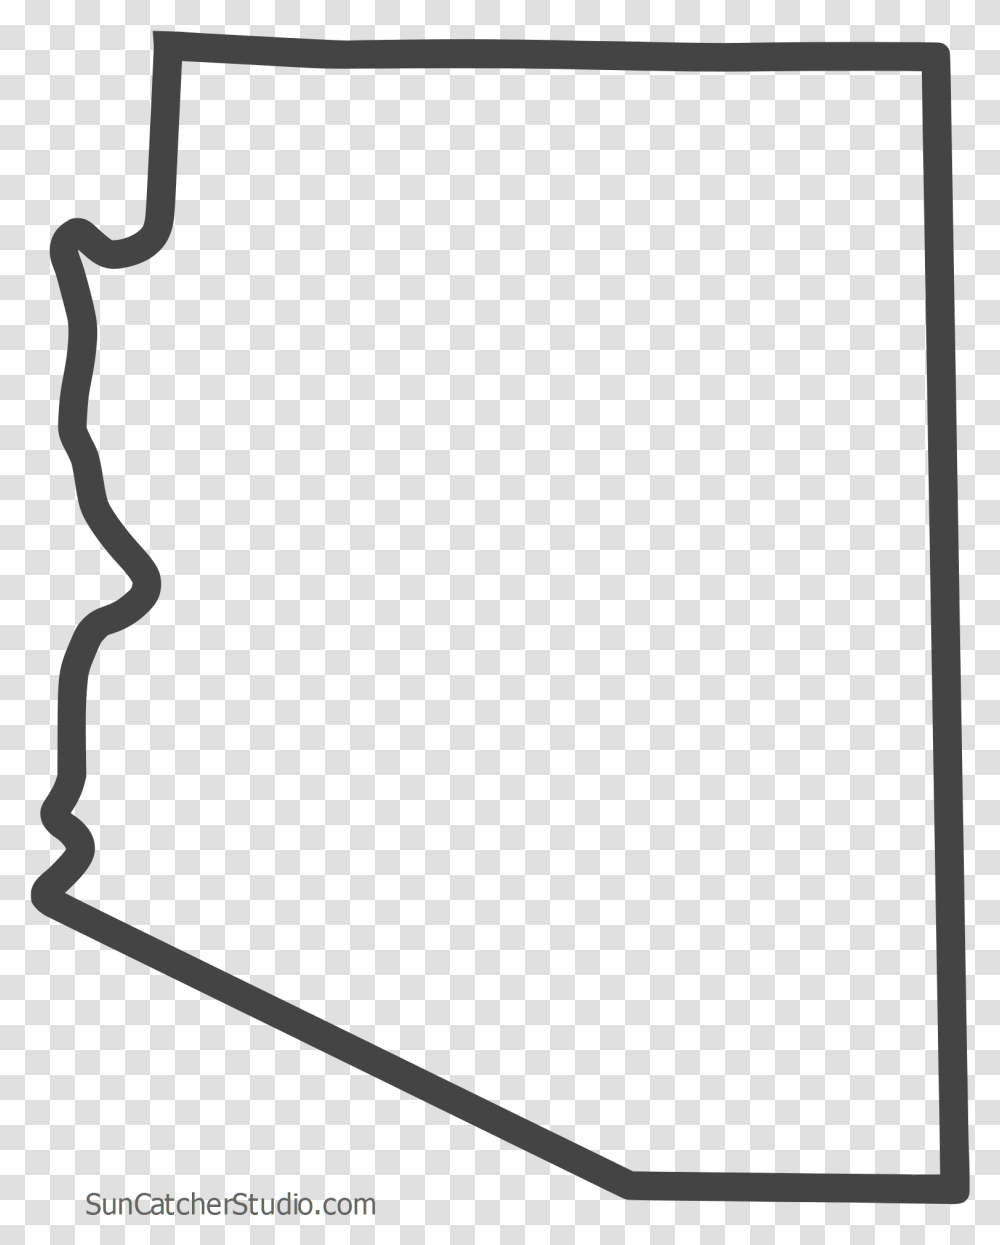 Free Arizona Outline With Home On Border Cricut Or Printable Arizona State Outline Transparent Png